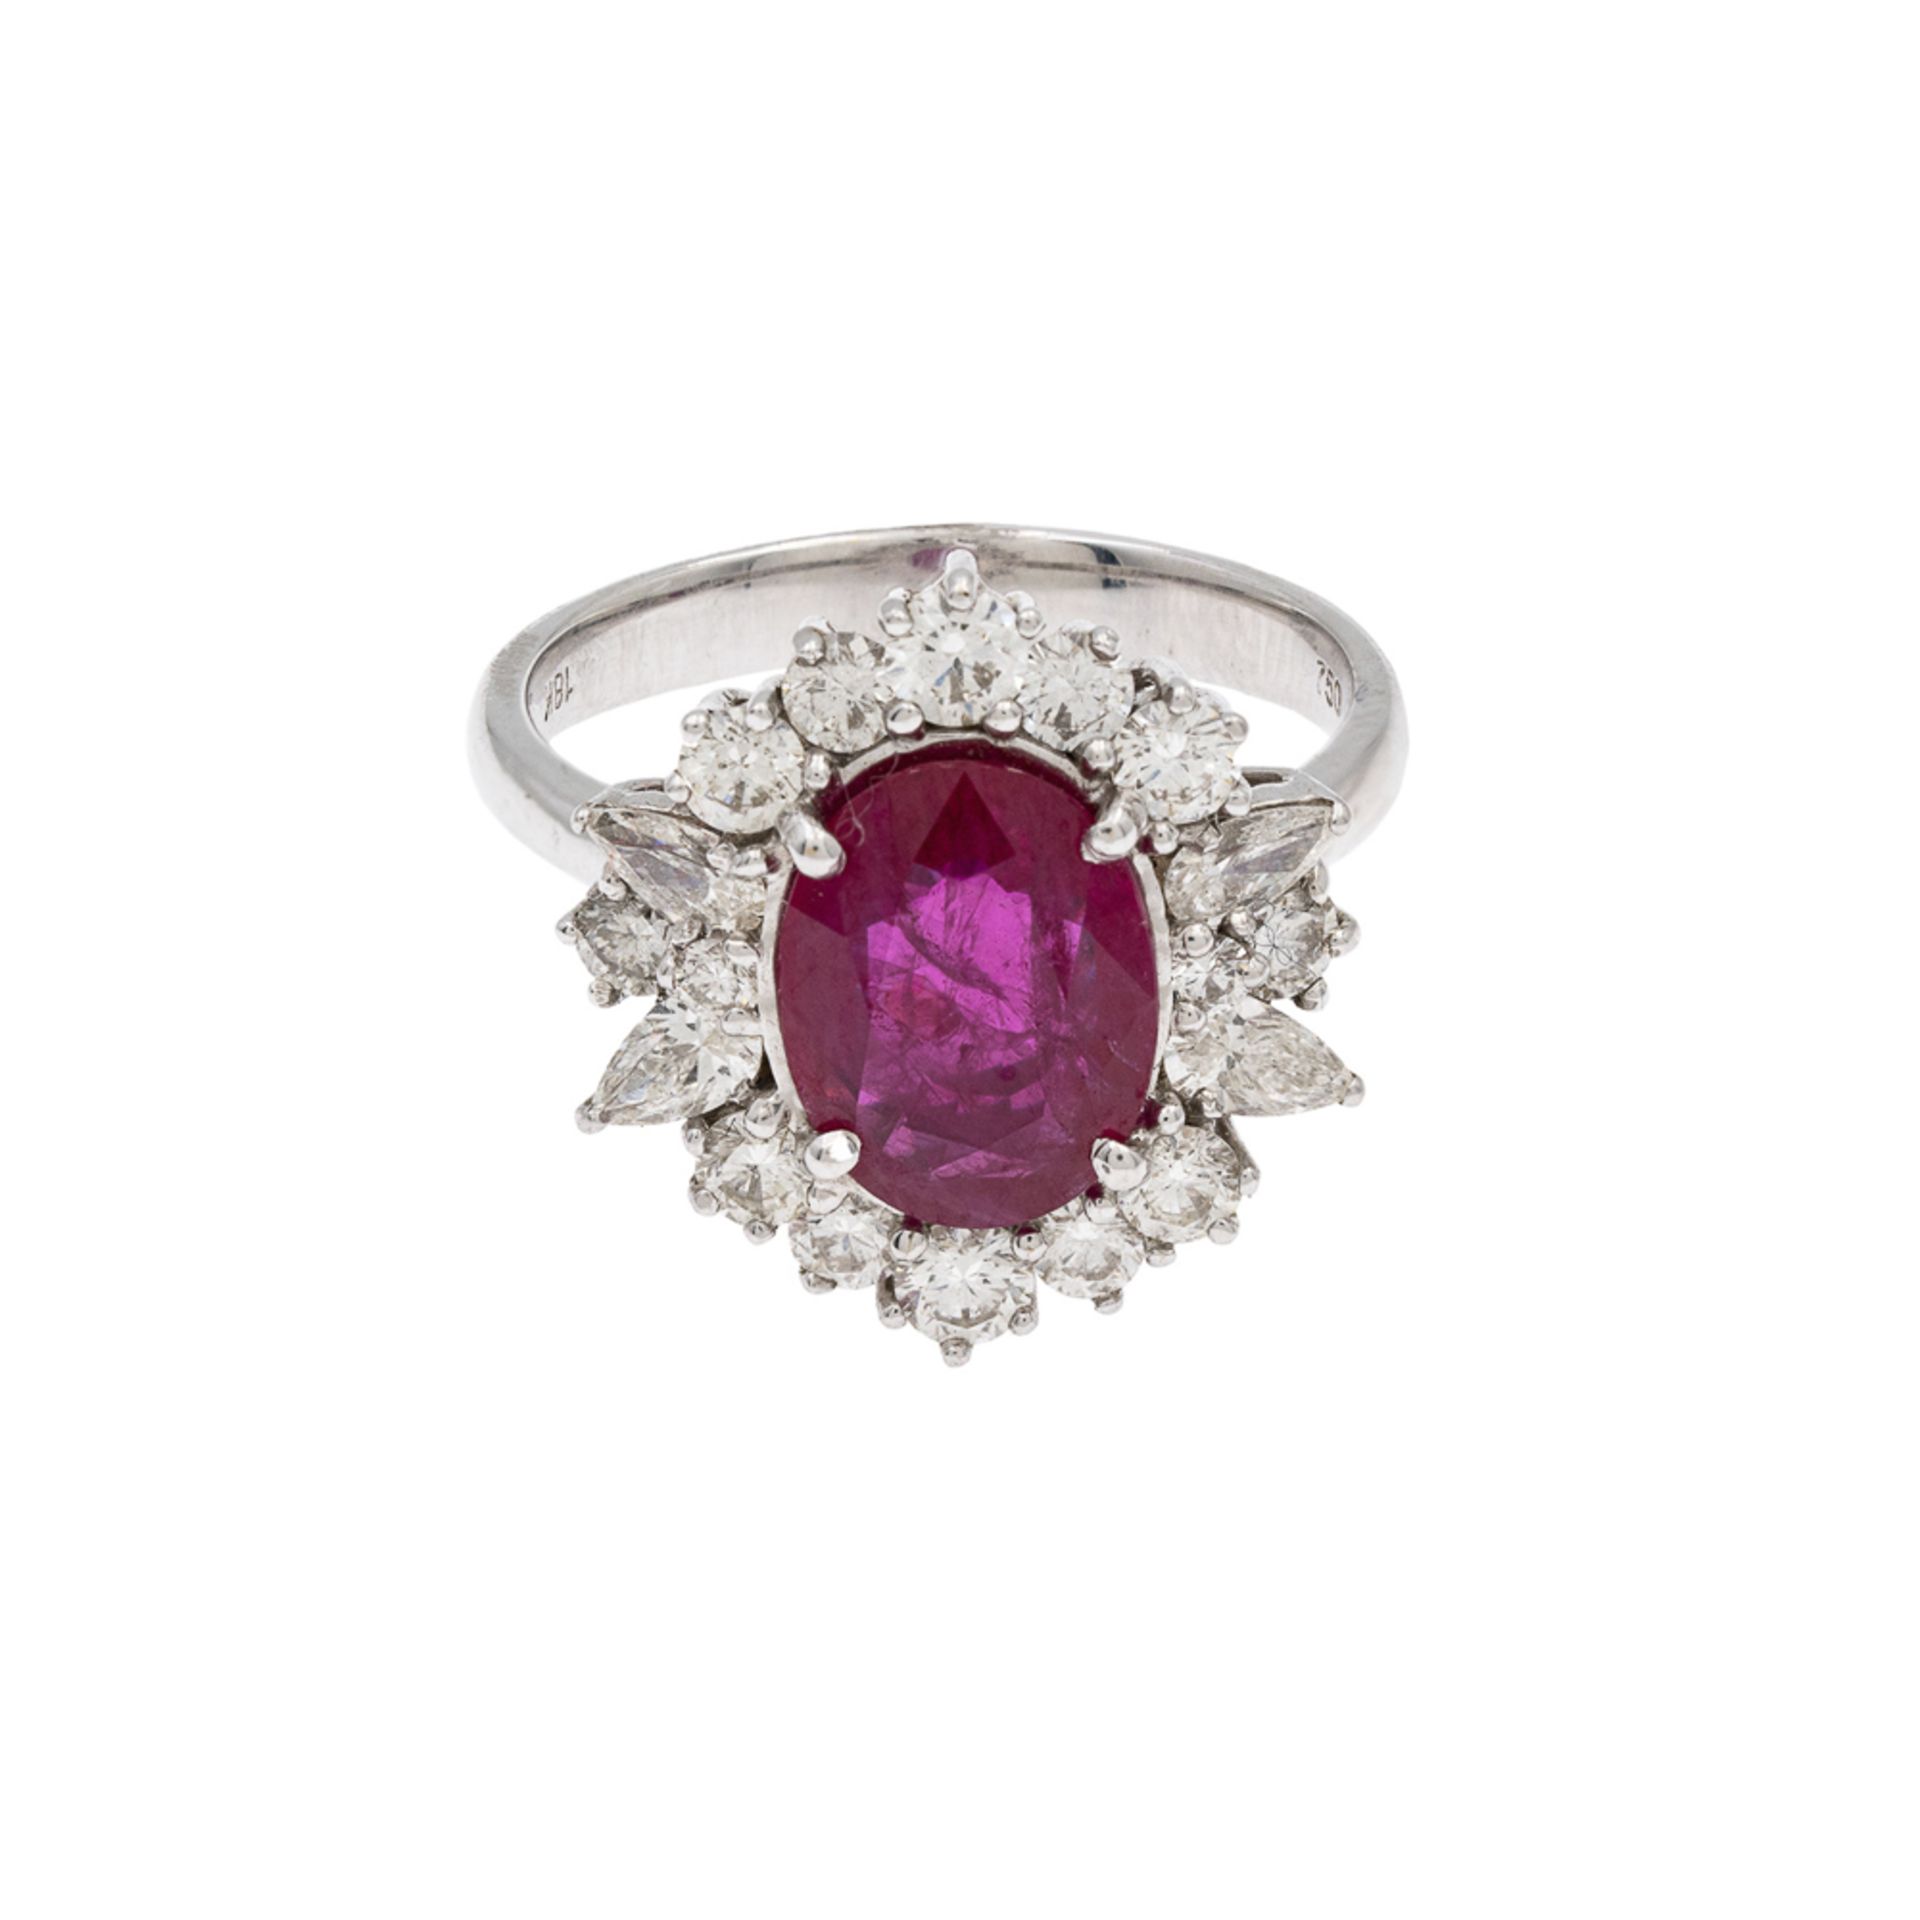 18kt white gold ring with natural Burmese ruby - Image 2 of 2